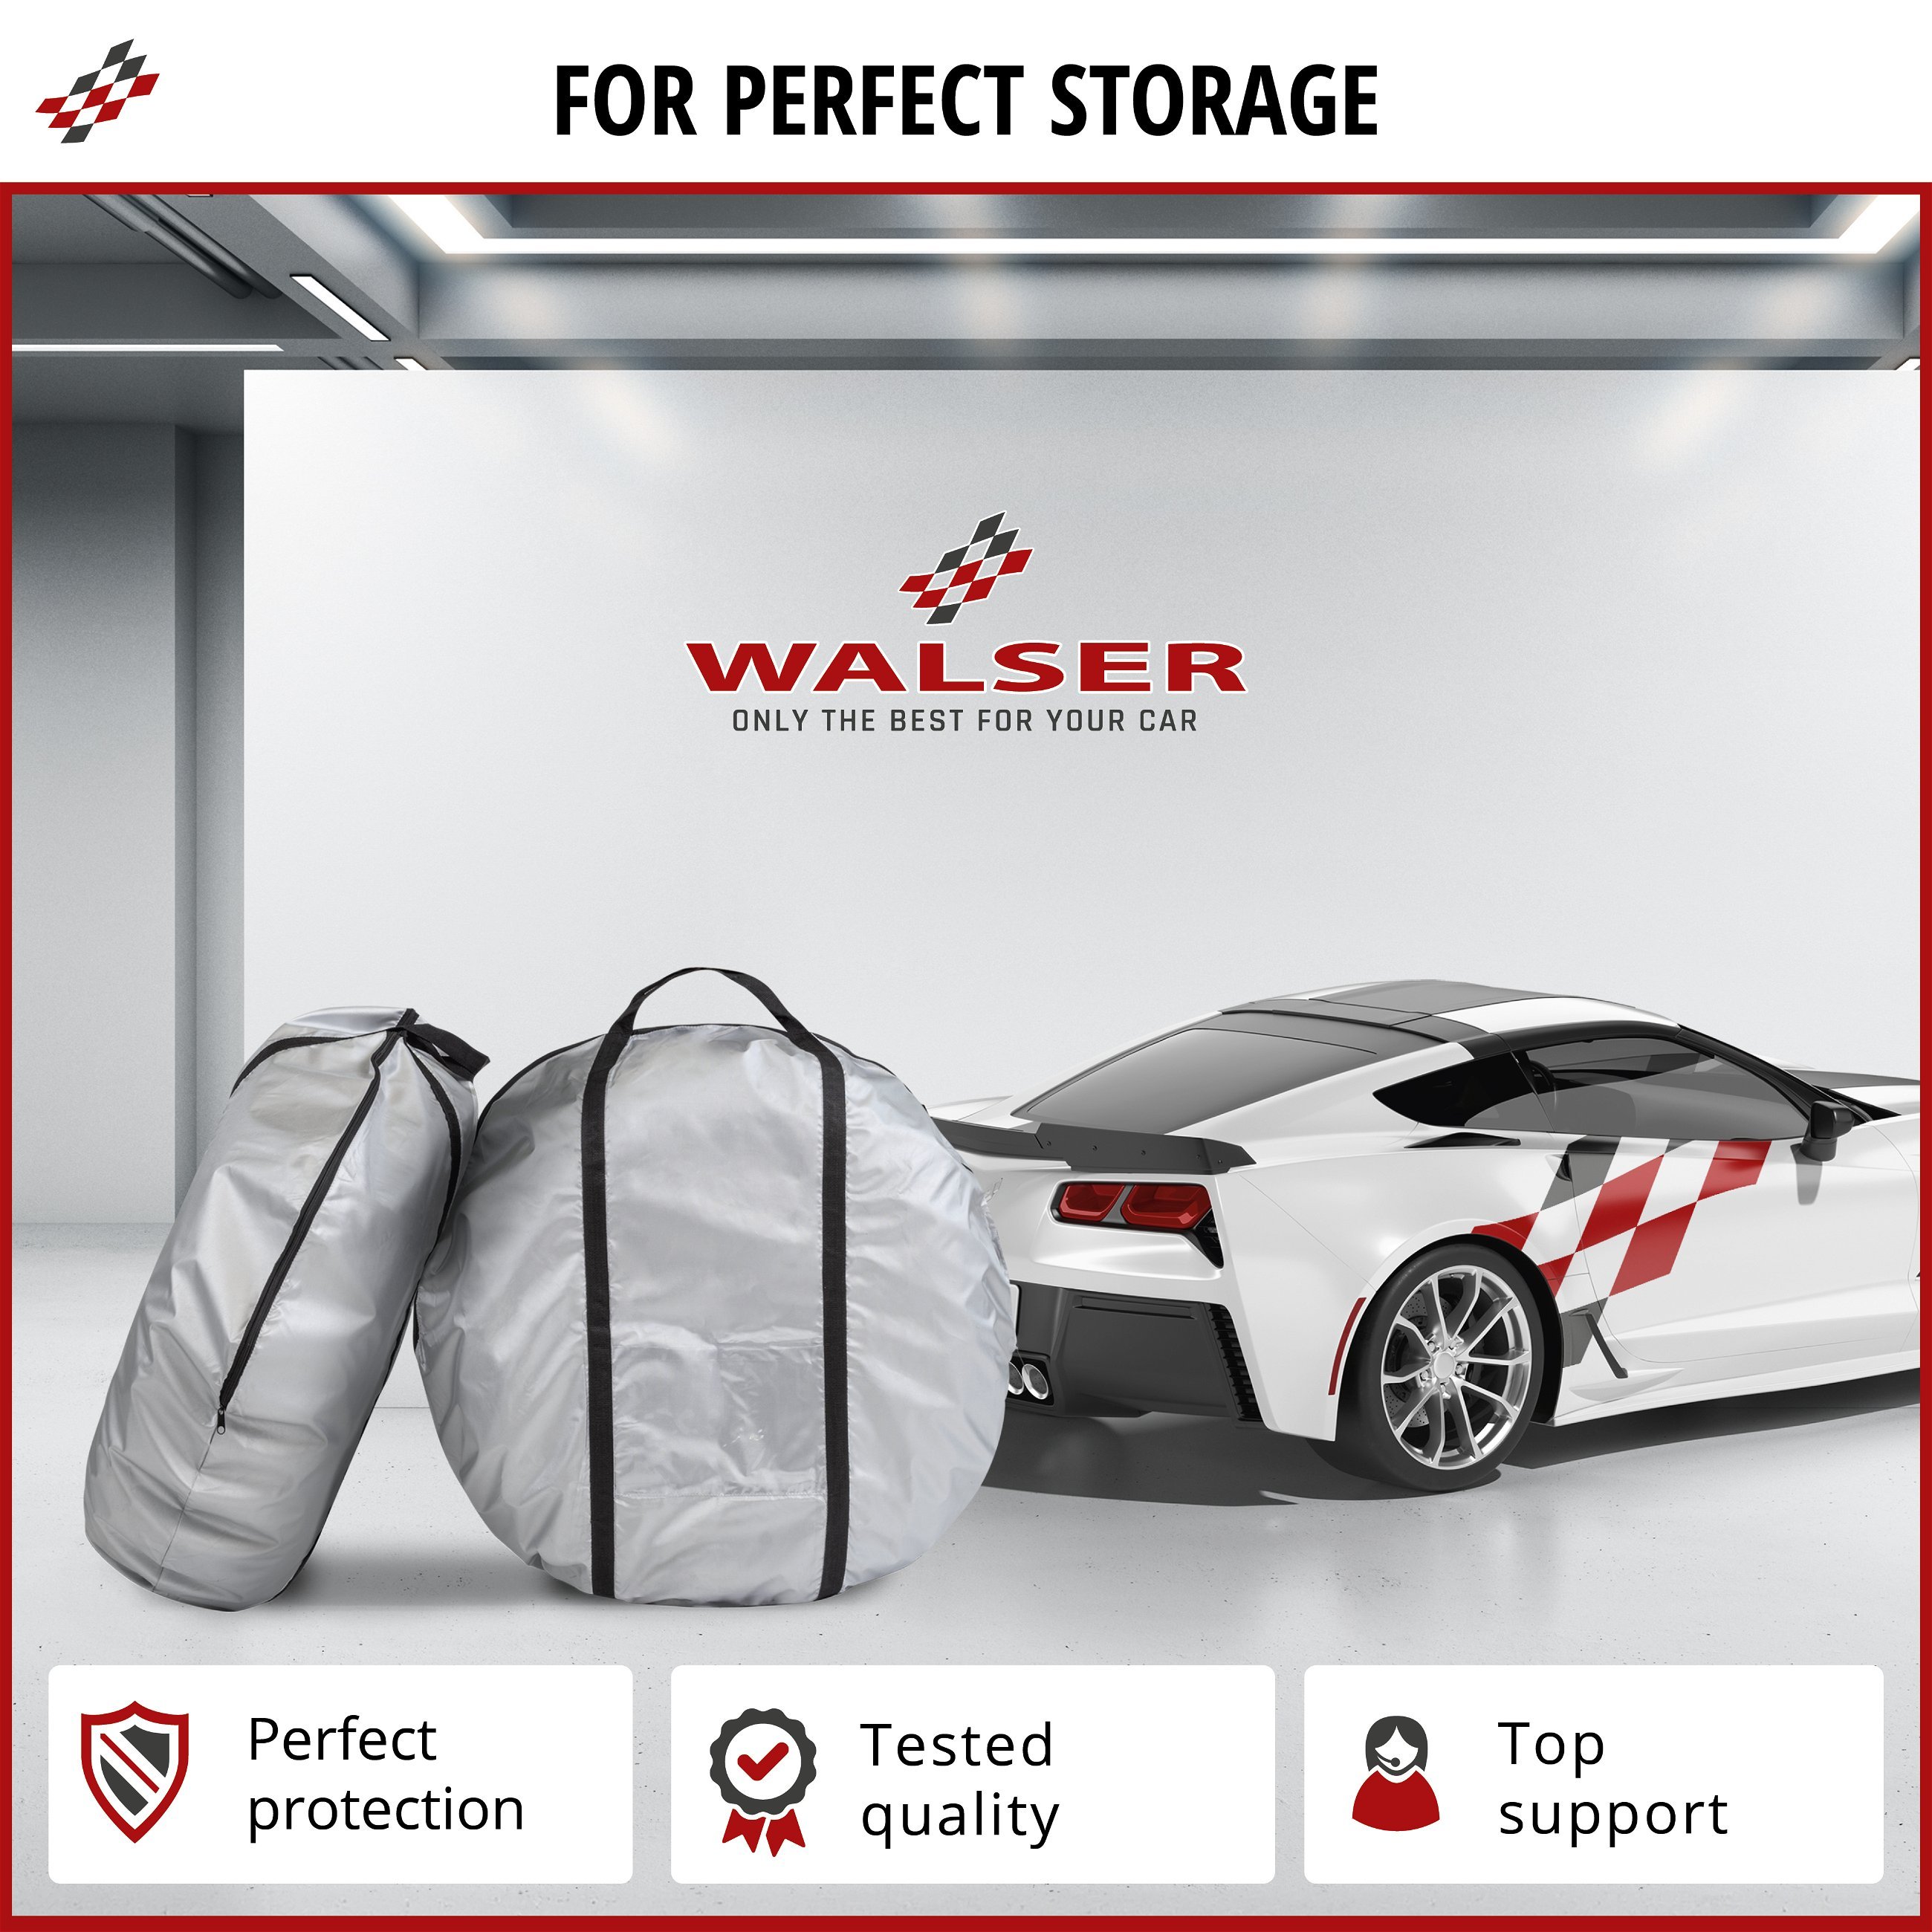 Tire storage Bag size L, tyre bag 15-16 inch tyres silver